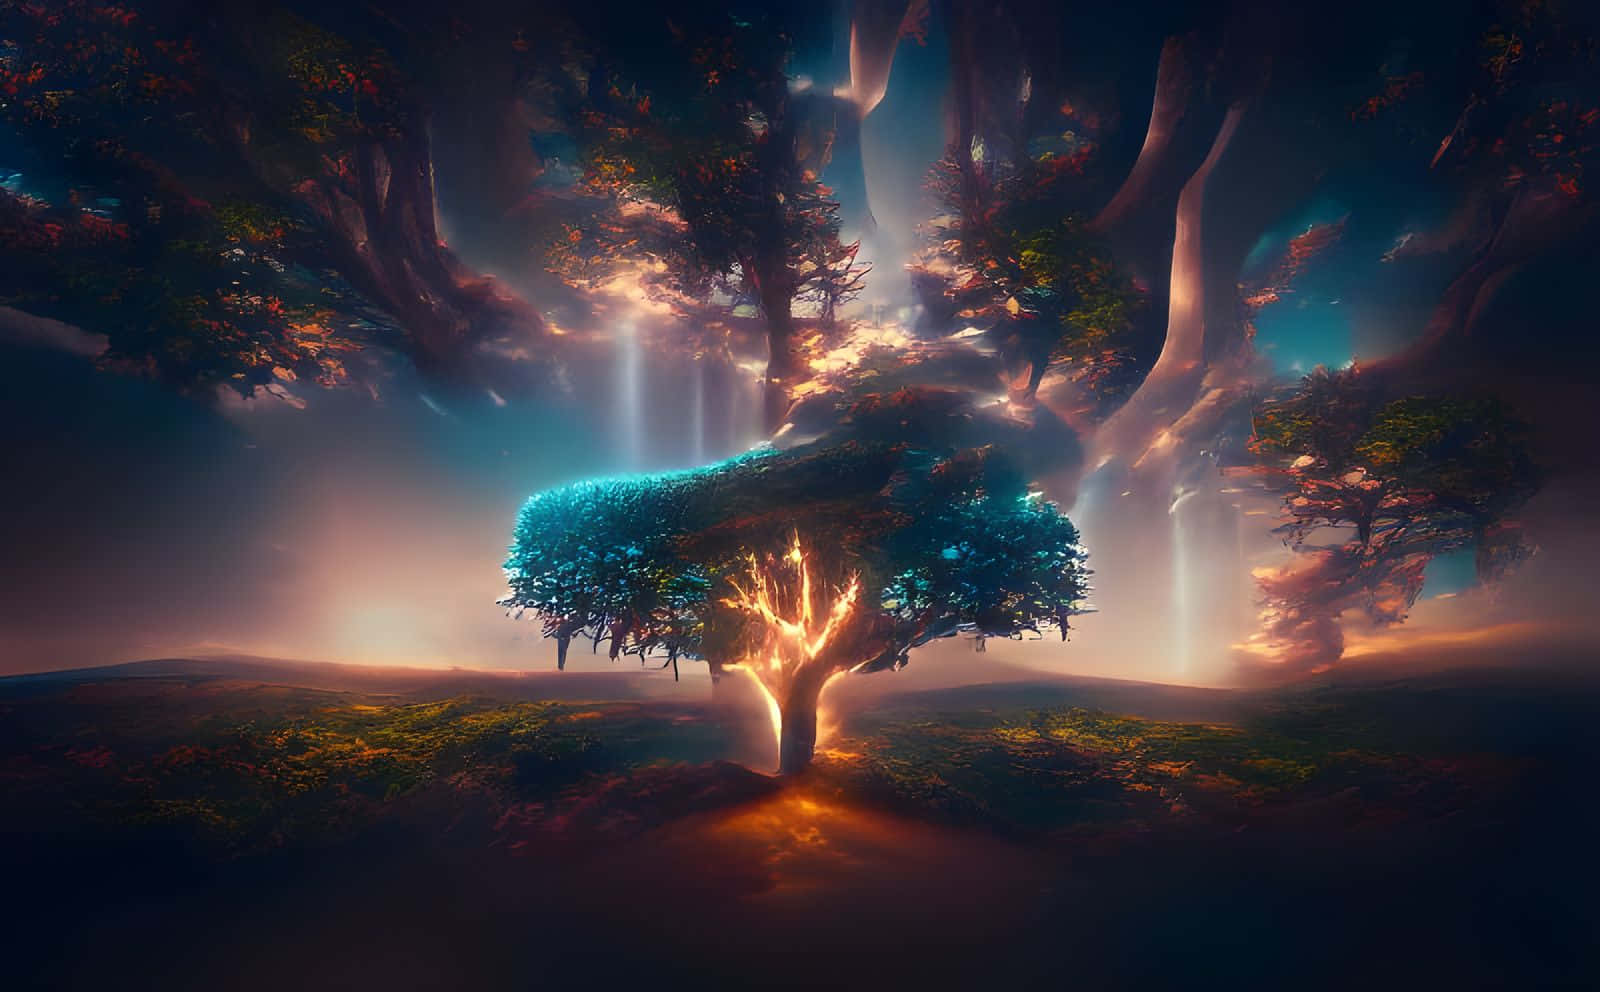 Tree Of Life Background Images HD Pictures and Wallpaper For Free Download   Pngtree